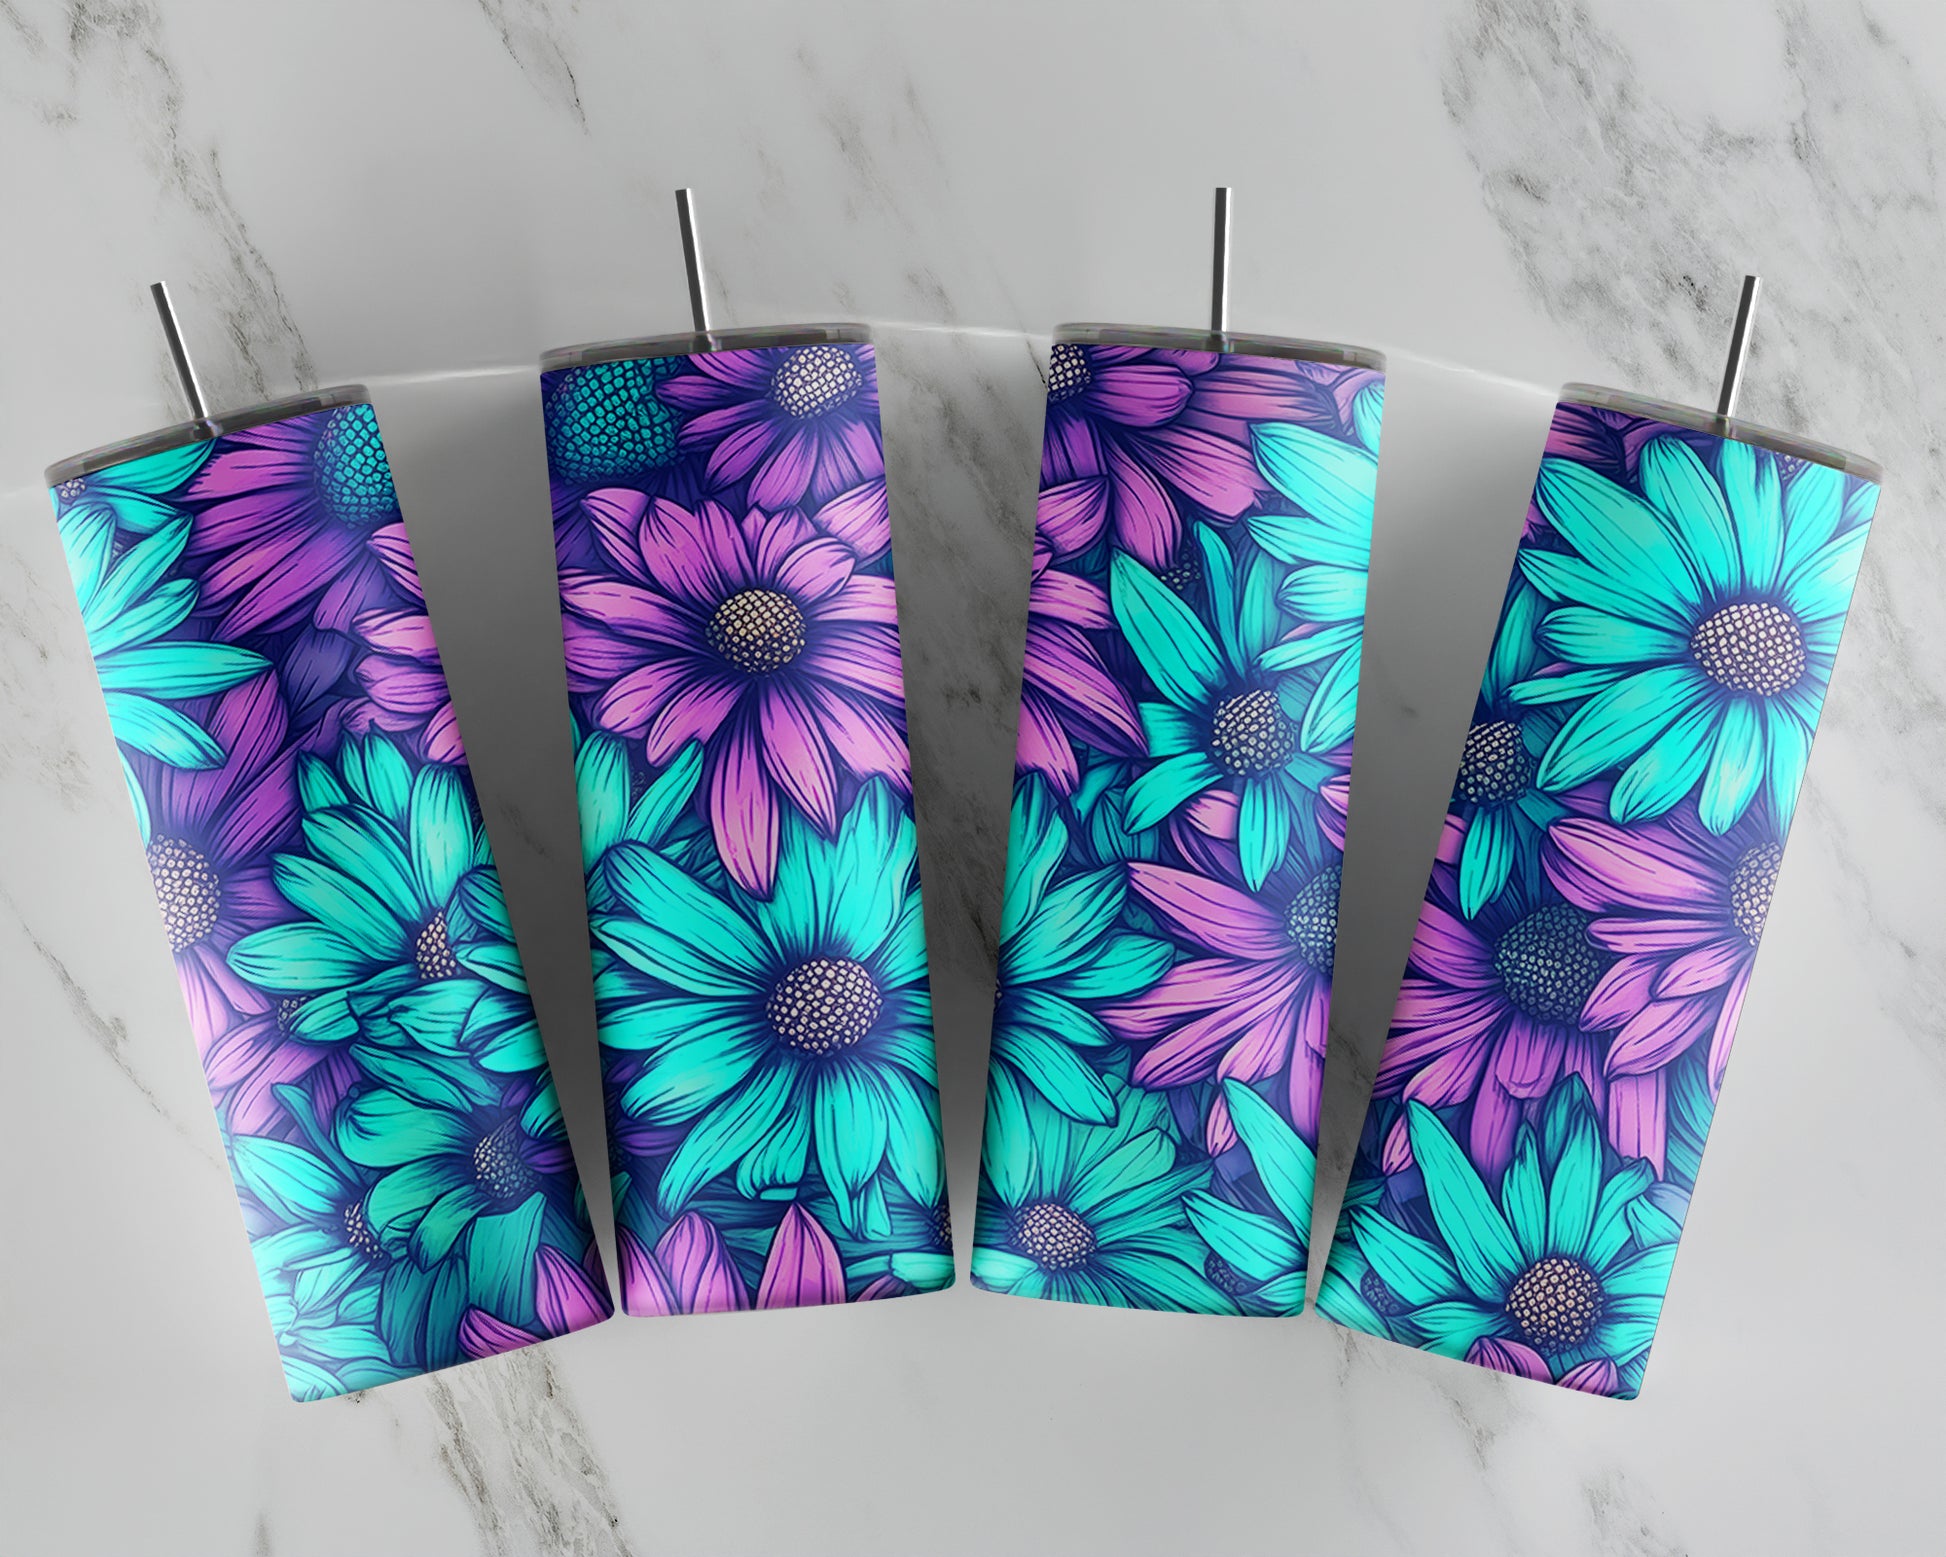 Tumbler sublimation design with daisy